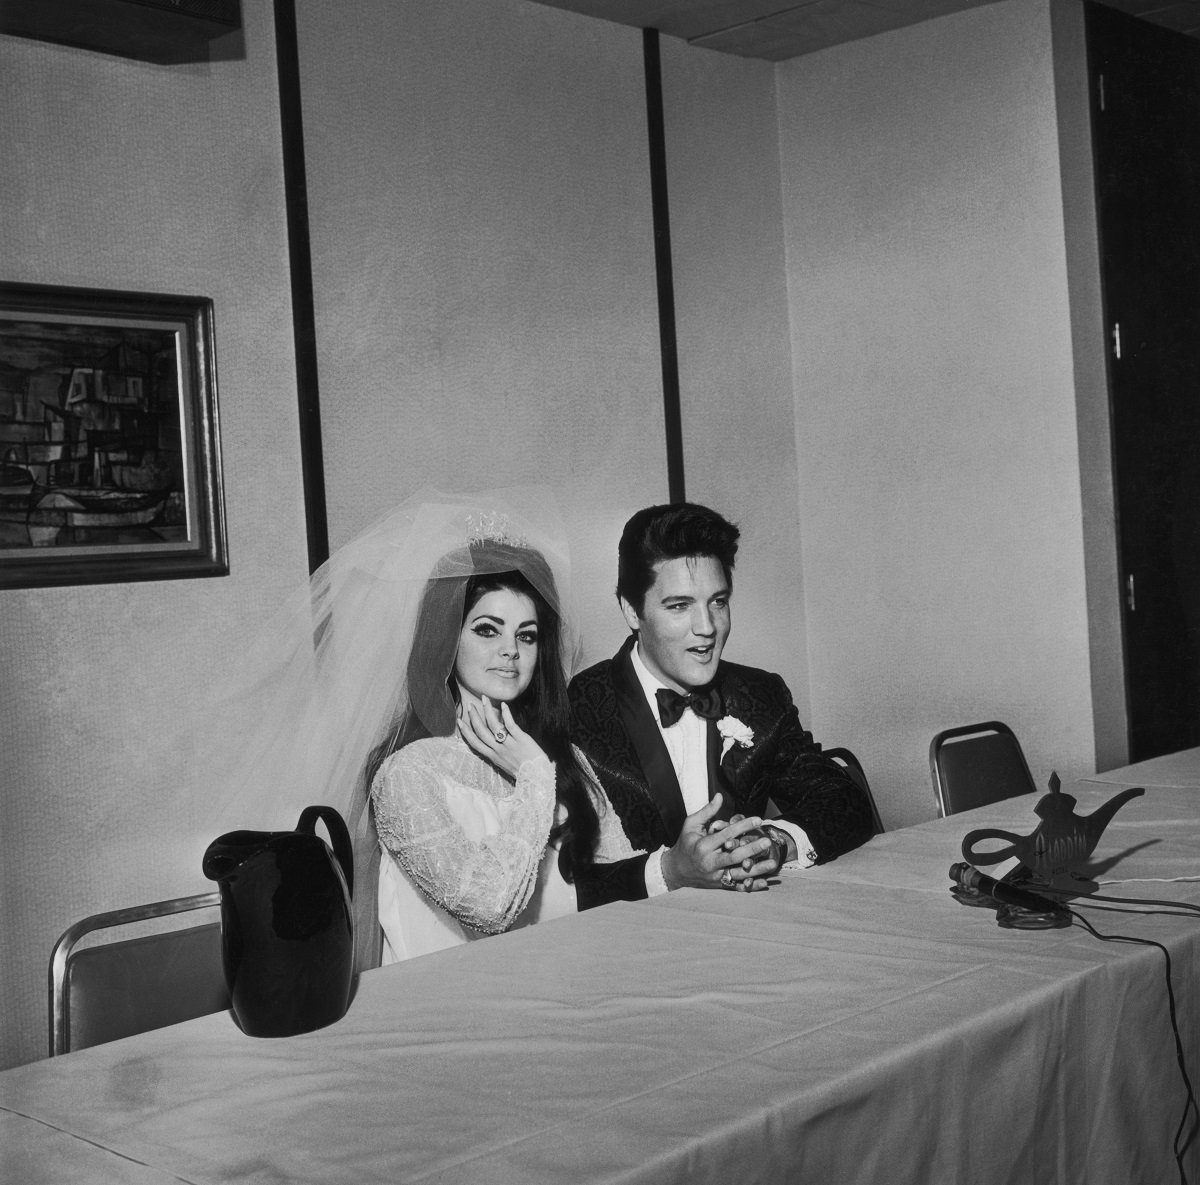 Elvis Presley sitting at a reception table with his bride Priscilla Presley on their wedding day, at the Aladdin Hotel, Las Vegas, Nevada, 1st May 1967.